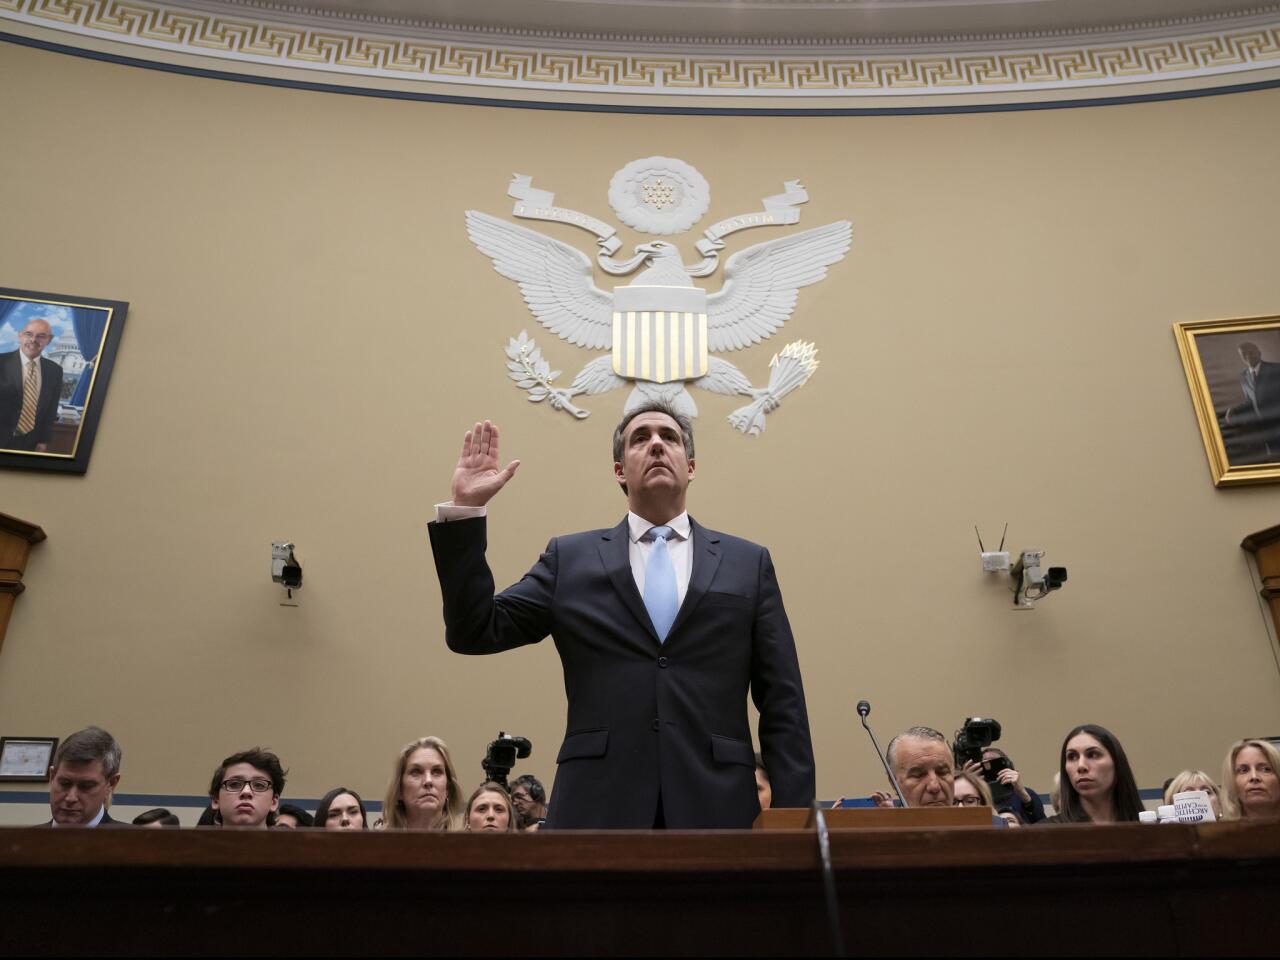 Michael Cohen, President Donald Trump's former personal lawyer, is sworn in to testify on Capitol Hill in Washington.